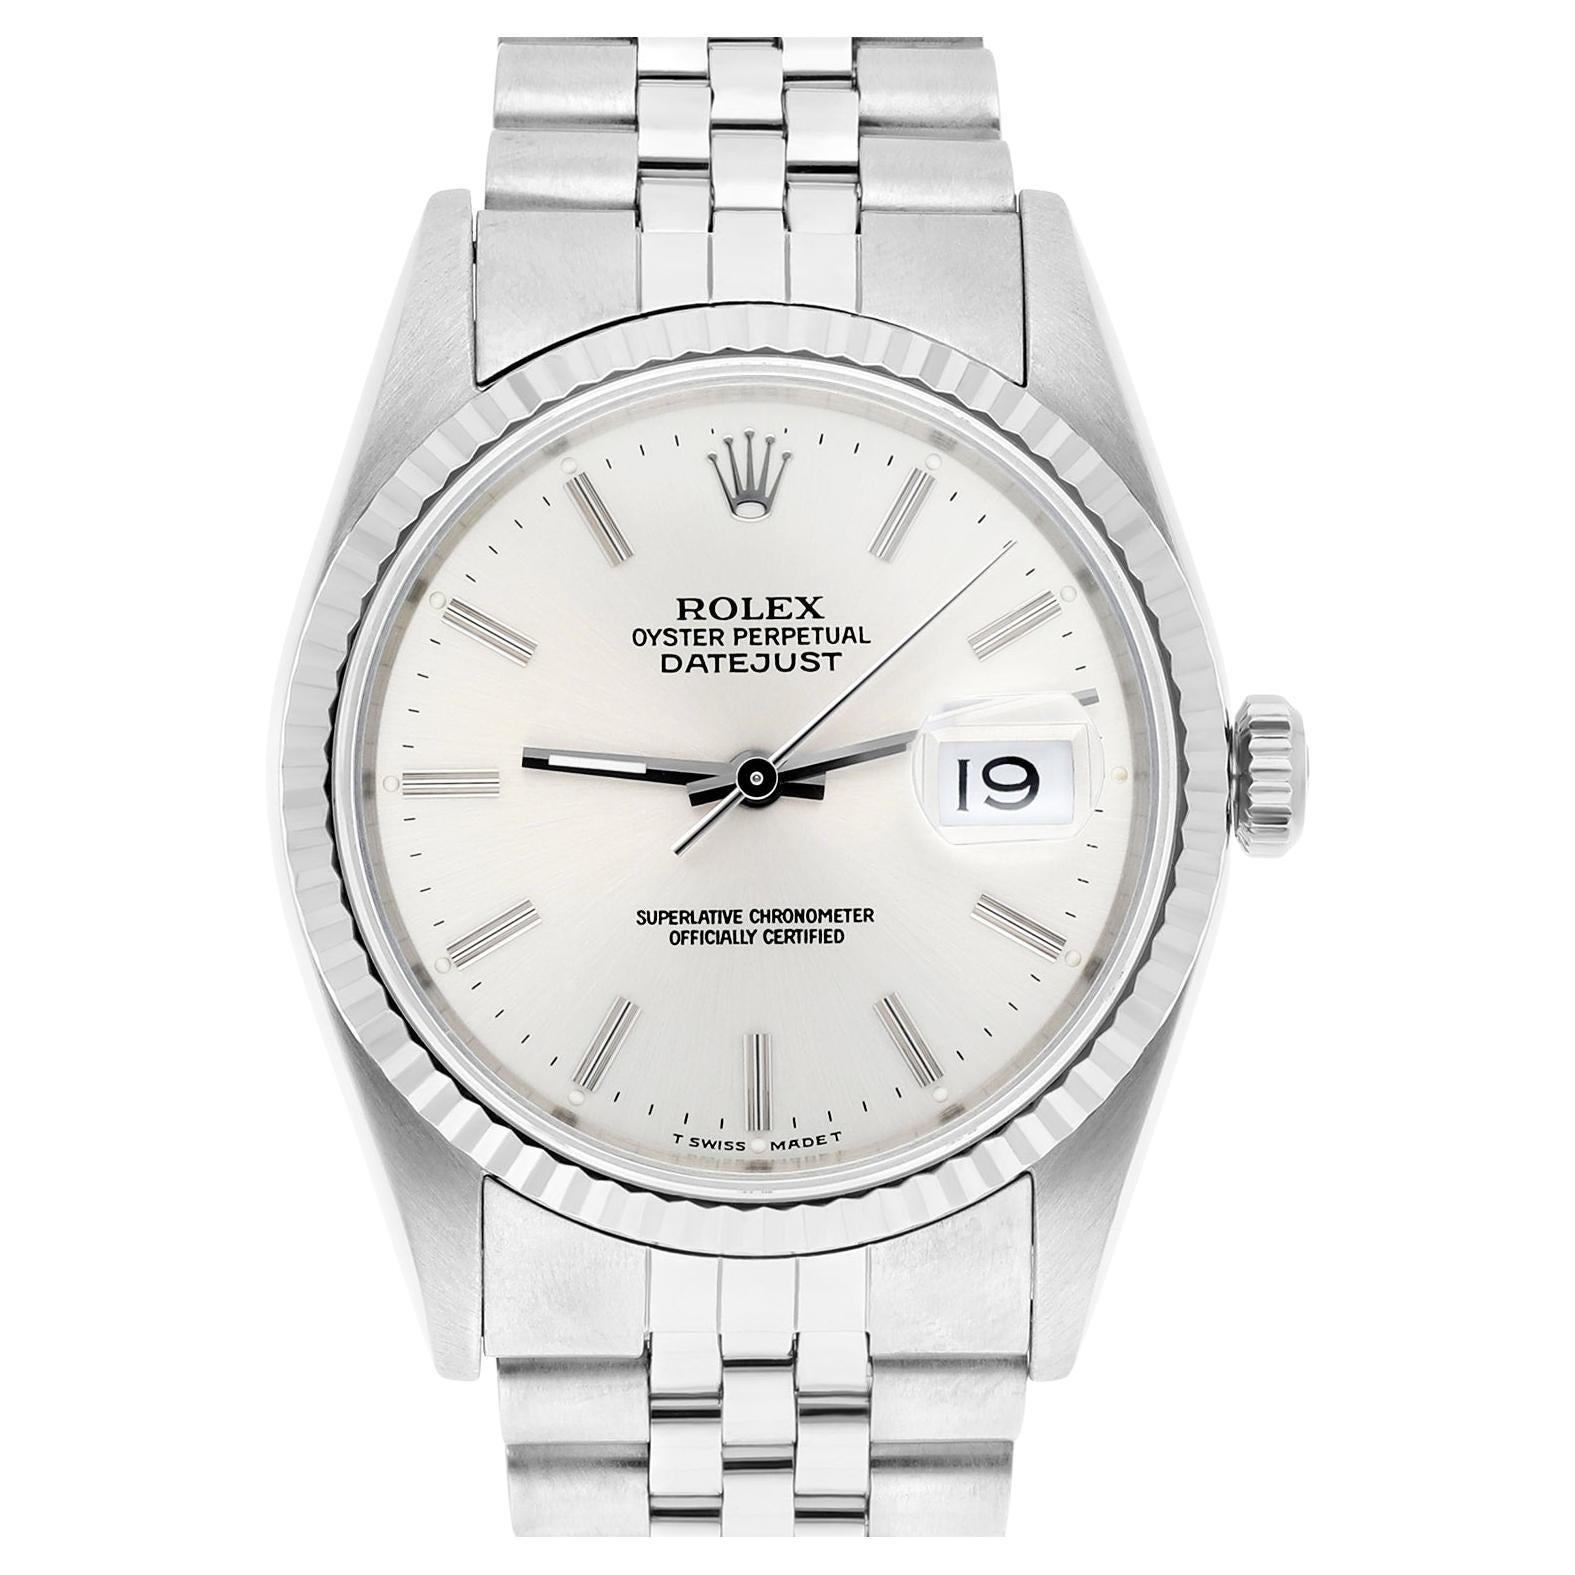 Rolex Datejust 36mm Stainless Steel 16234 Silver Dial, Jubilee Circa 1991 For Sale